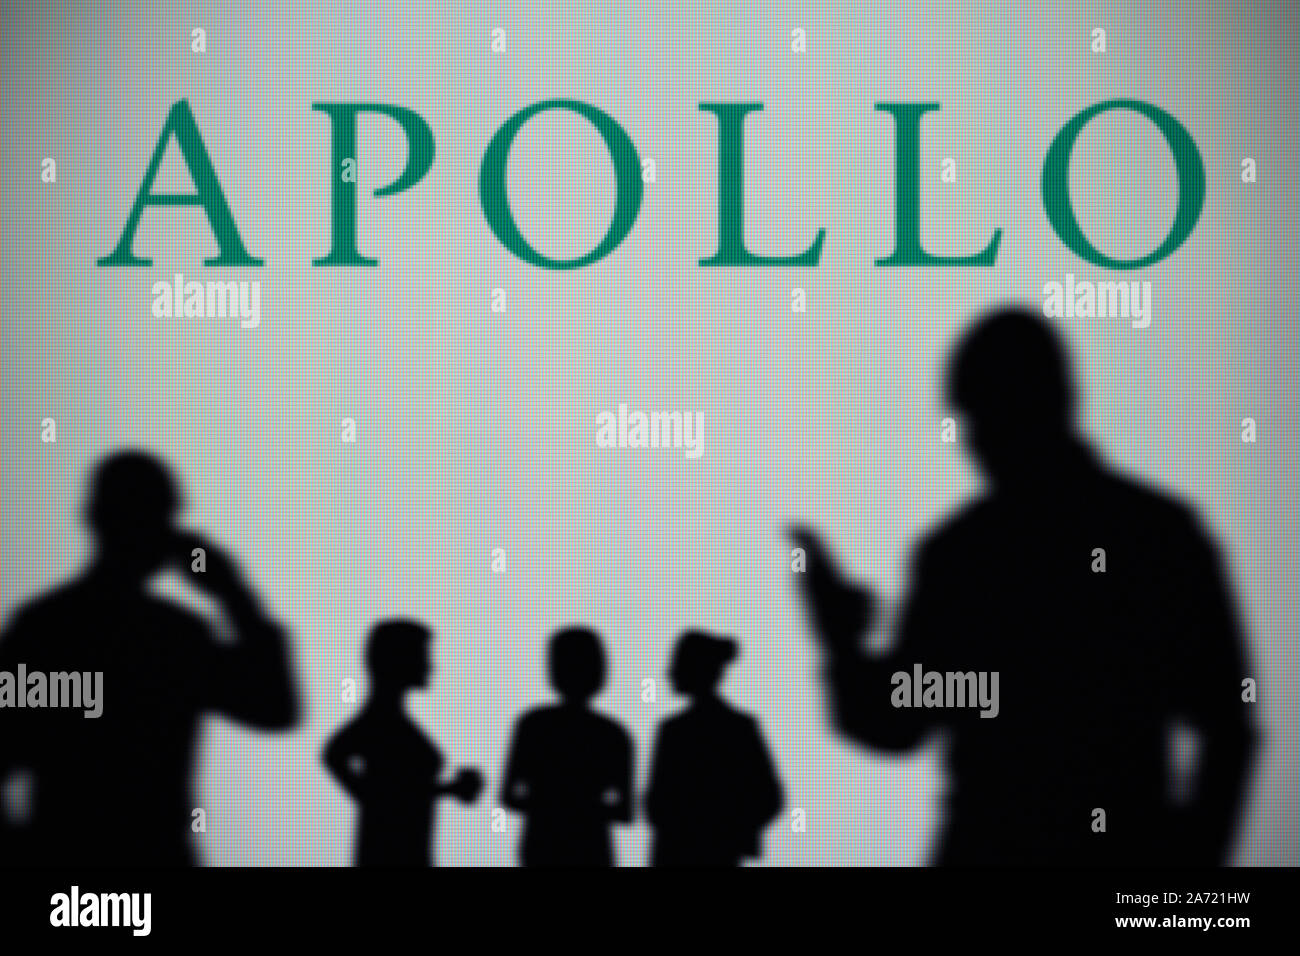 The Apollo Global Management logo is seen on an LED screen in the background while a silhouetted person uses a smartphone (Editorial use only) Stock Photo